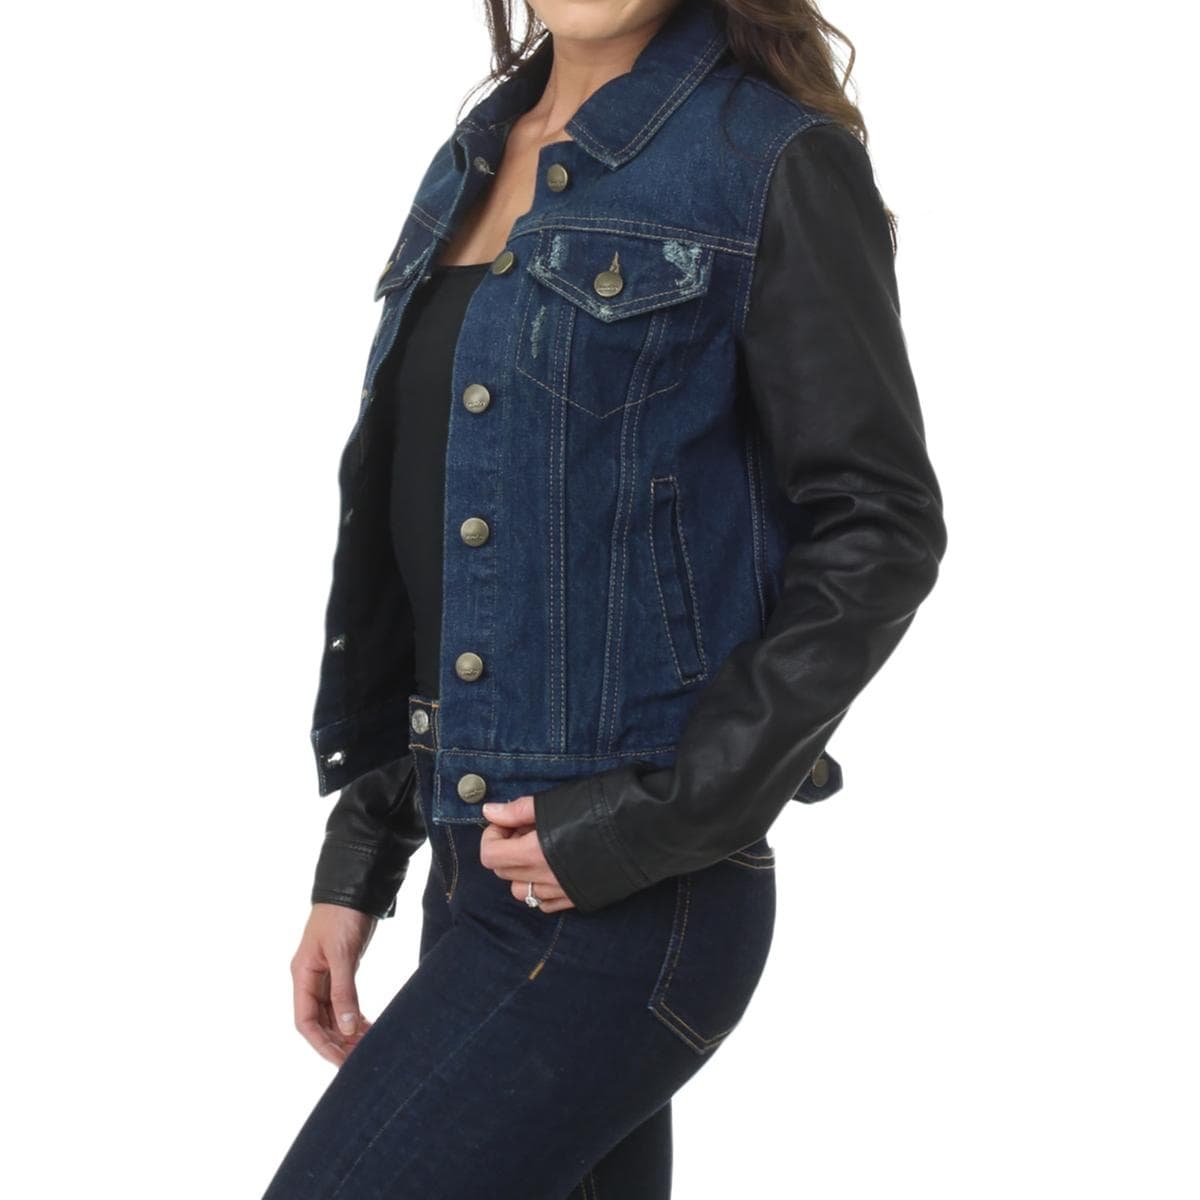 jean jacket with leather sleeves